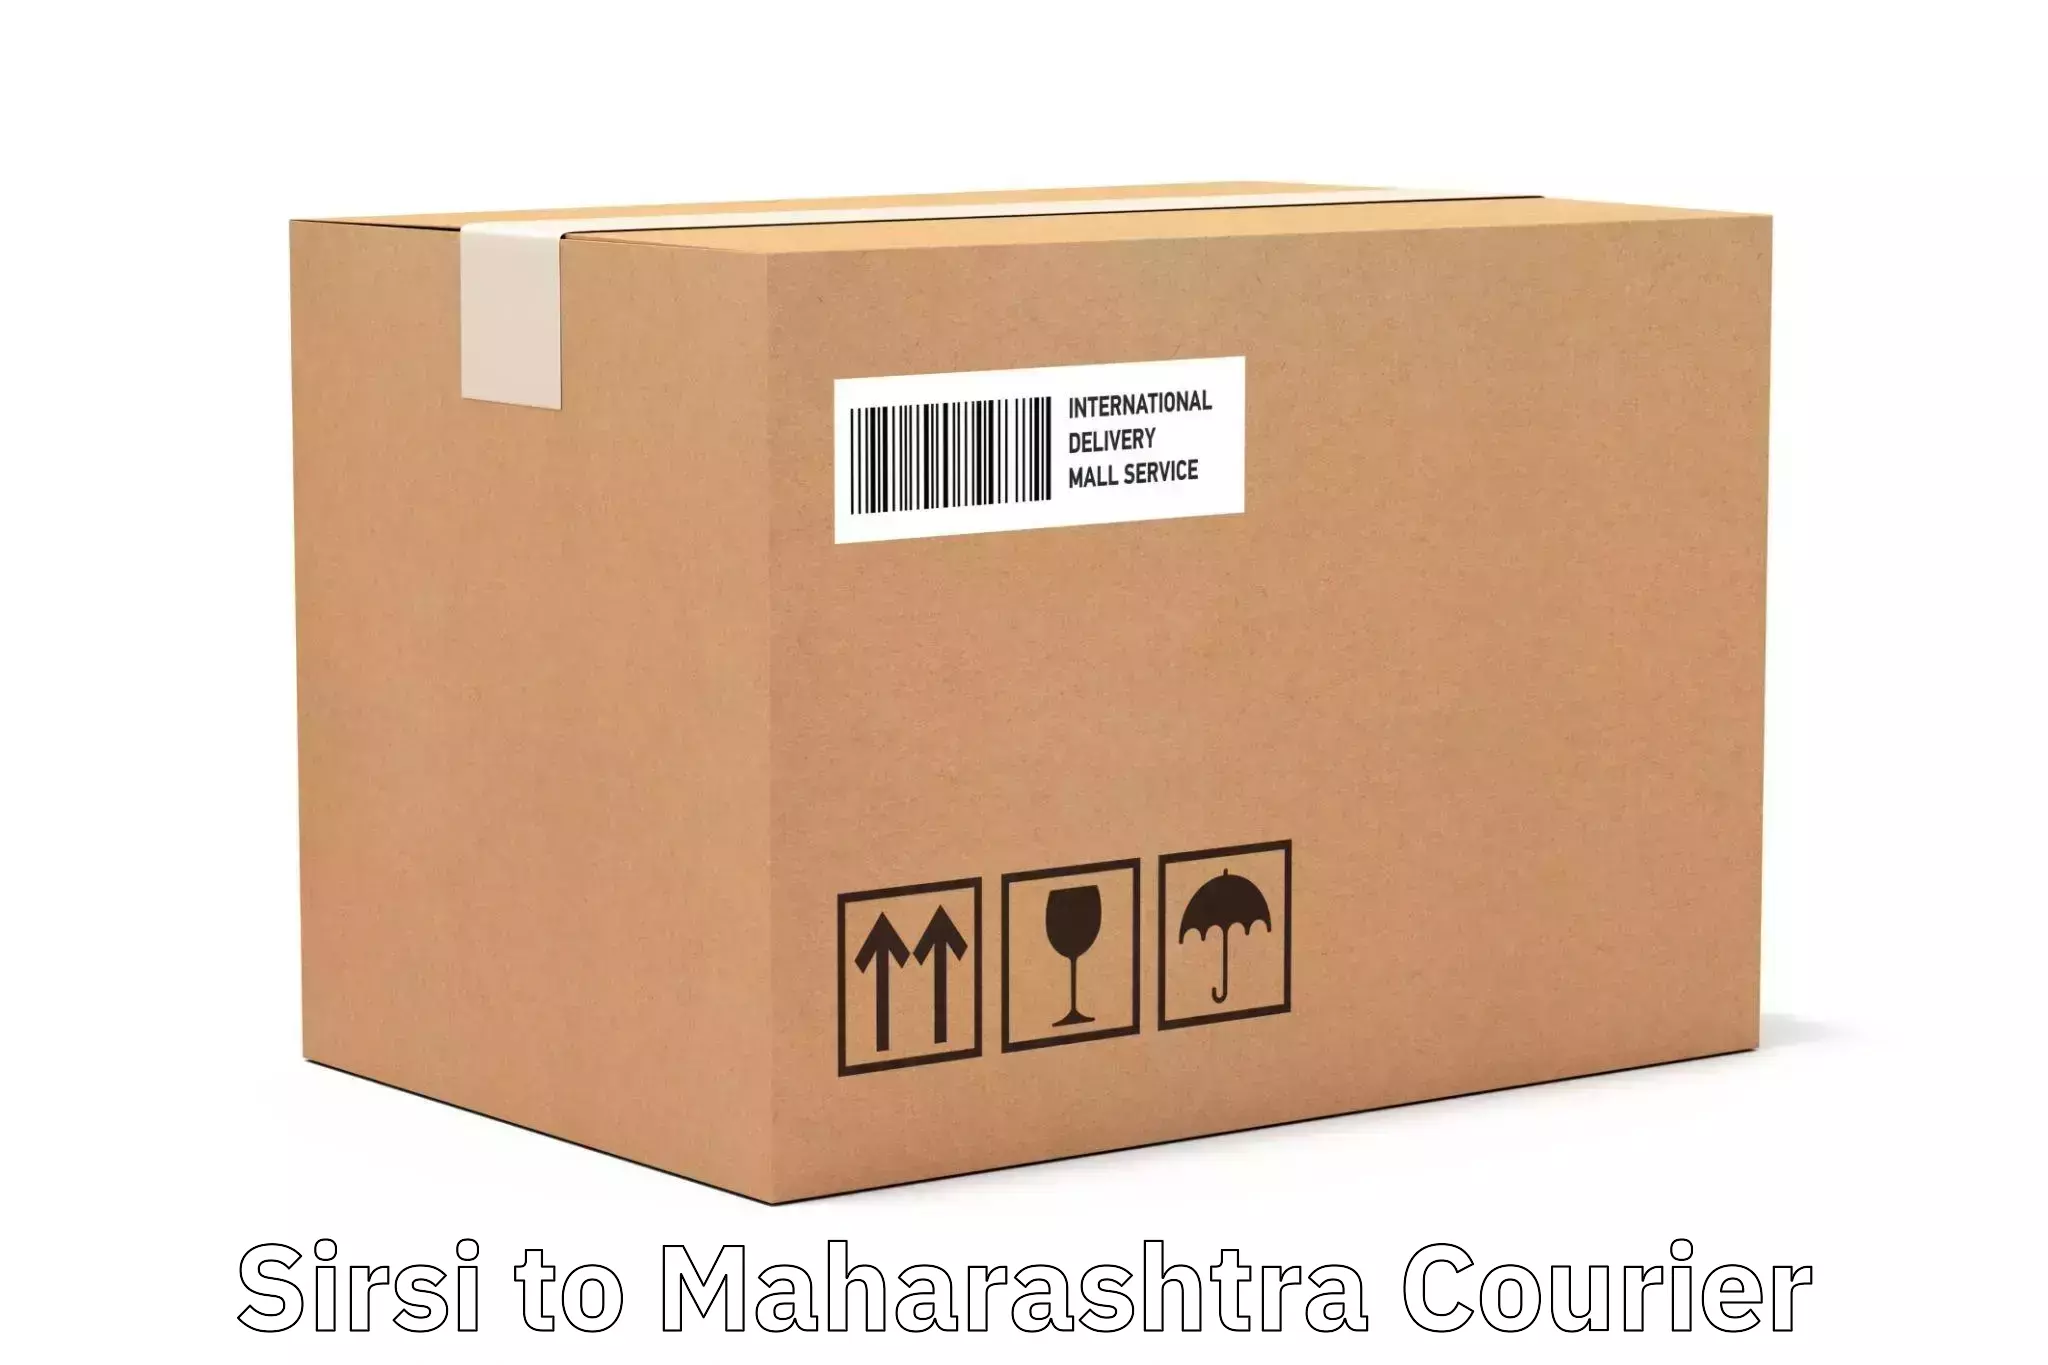 State-of-the-art courier technology in Sirsi to Navi Mumbai